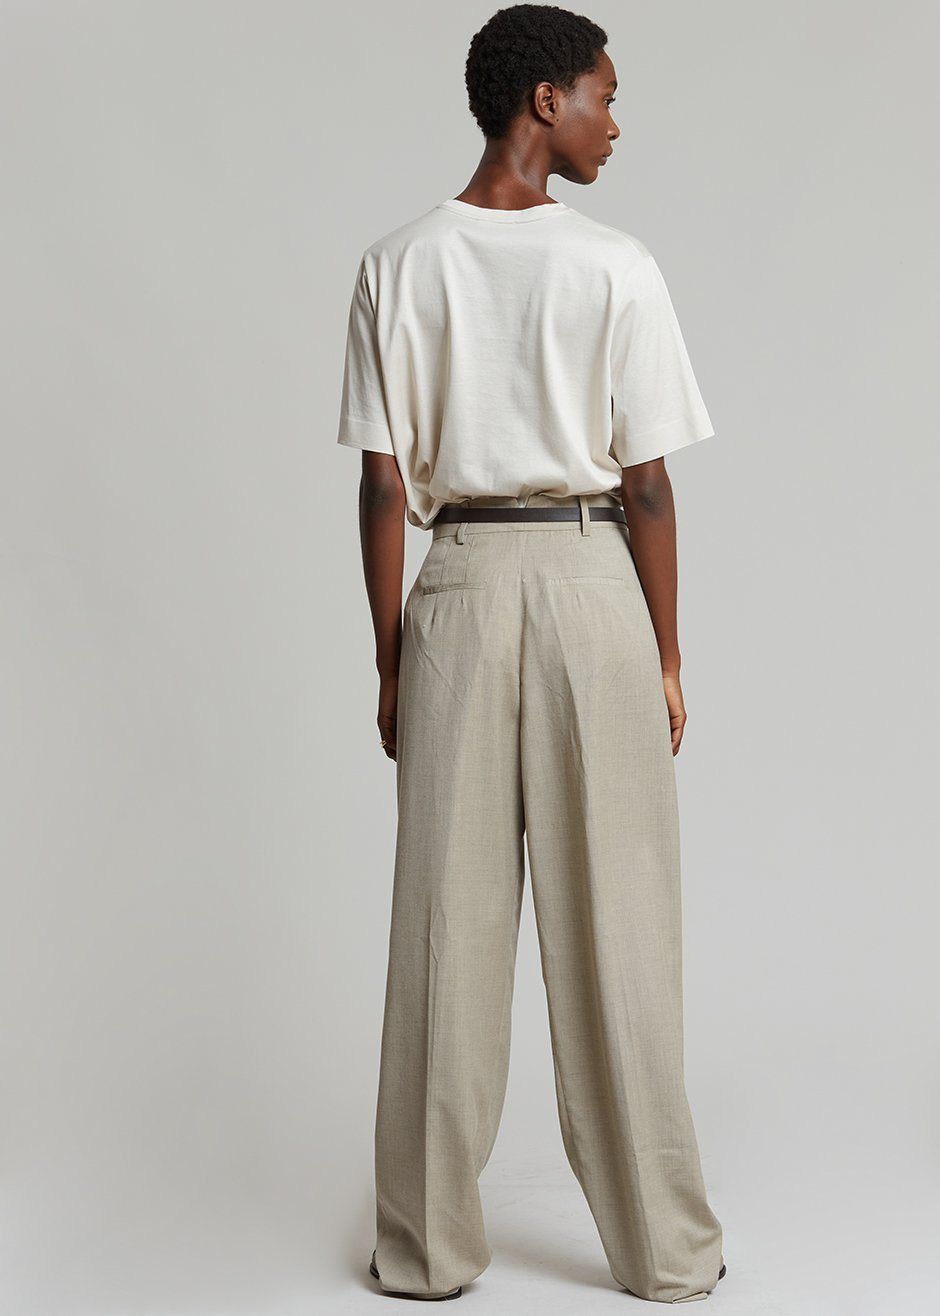 Gelso Pleated Trousers - Light Taupe Melange - 30